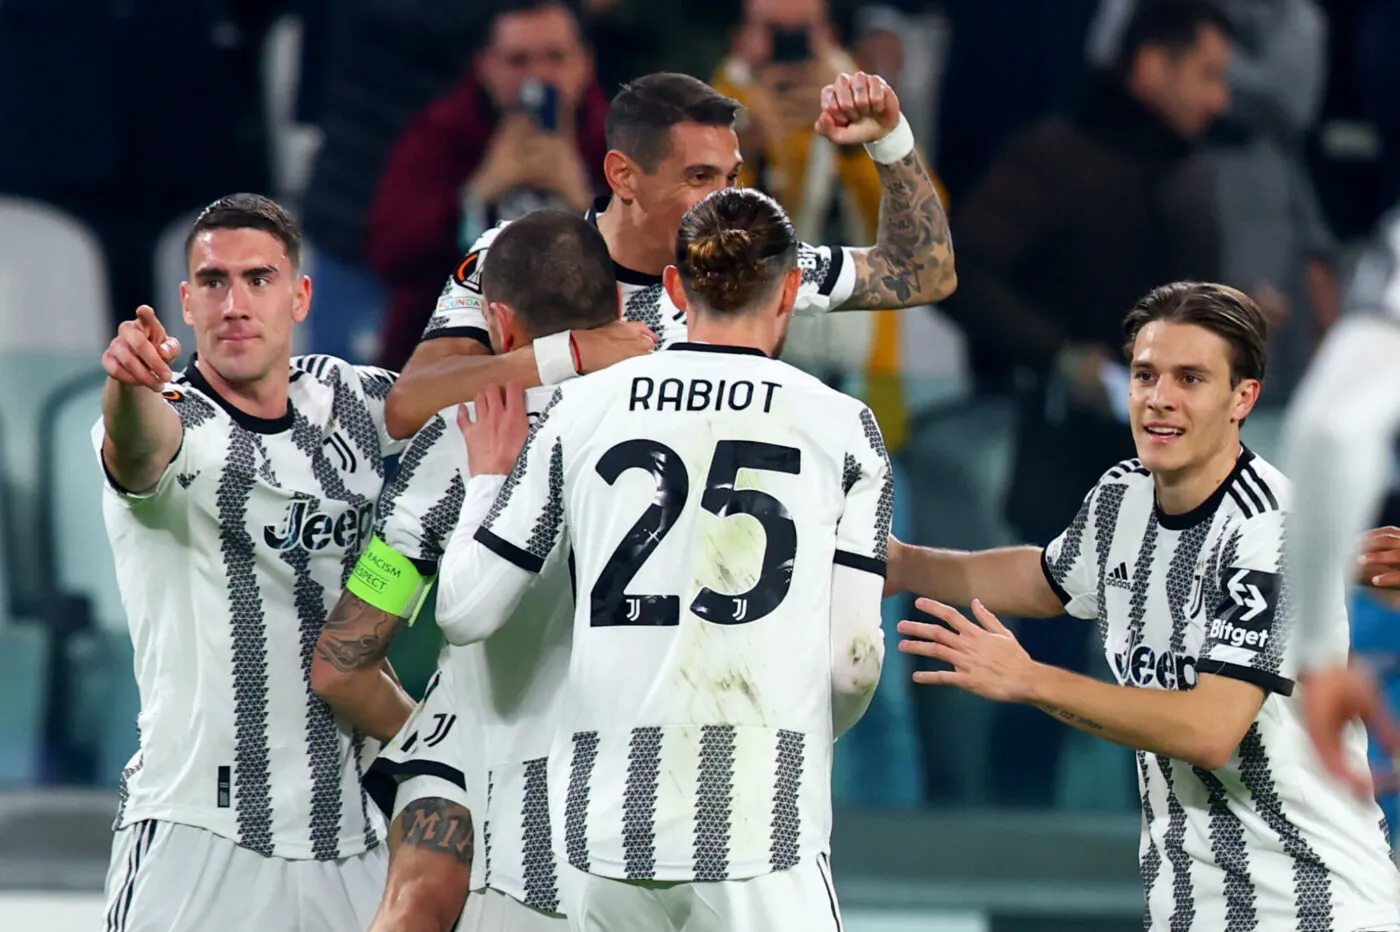 09 March 2023, Italy, Turin: Soccer: Europa League, Juventus Turin - SC Freiburg, Round of 16, first leg, Allianz Stadium. Turin's Ángel Di Maria (M/back) is cheered by teammates after scoring the 1:0 goal. Photo: Tom Weller/dpa - Photo by Icon sport